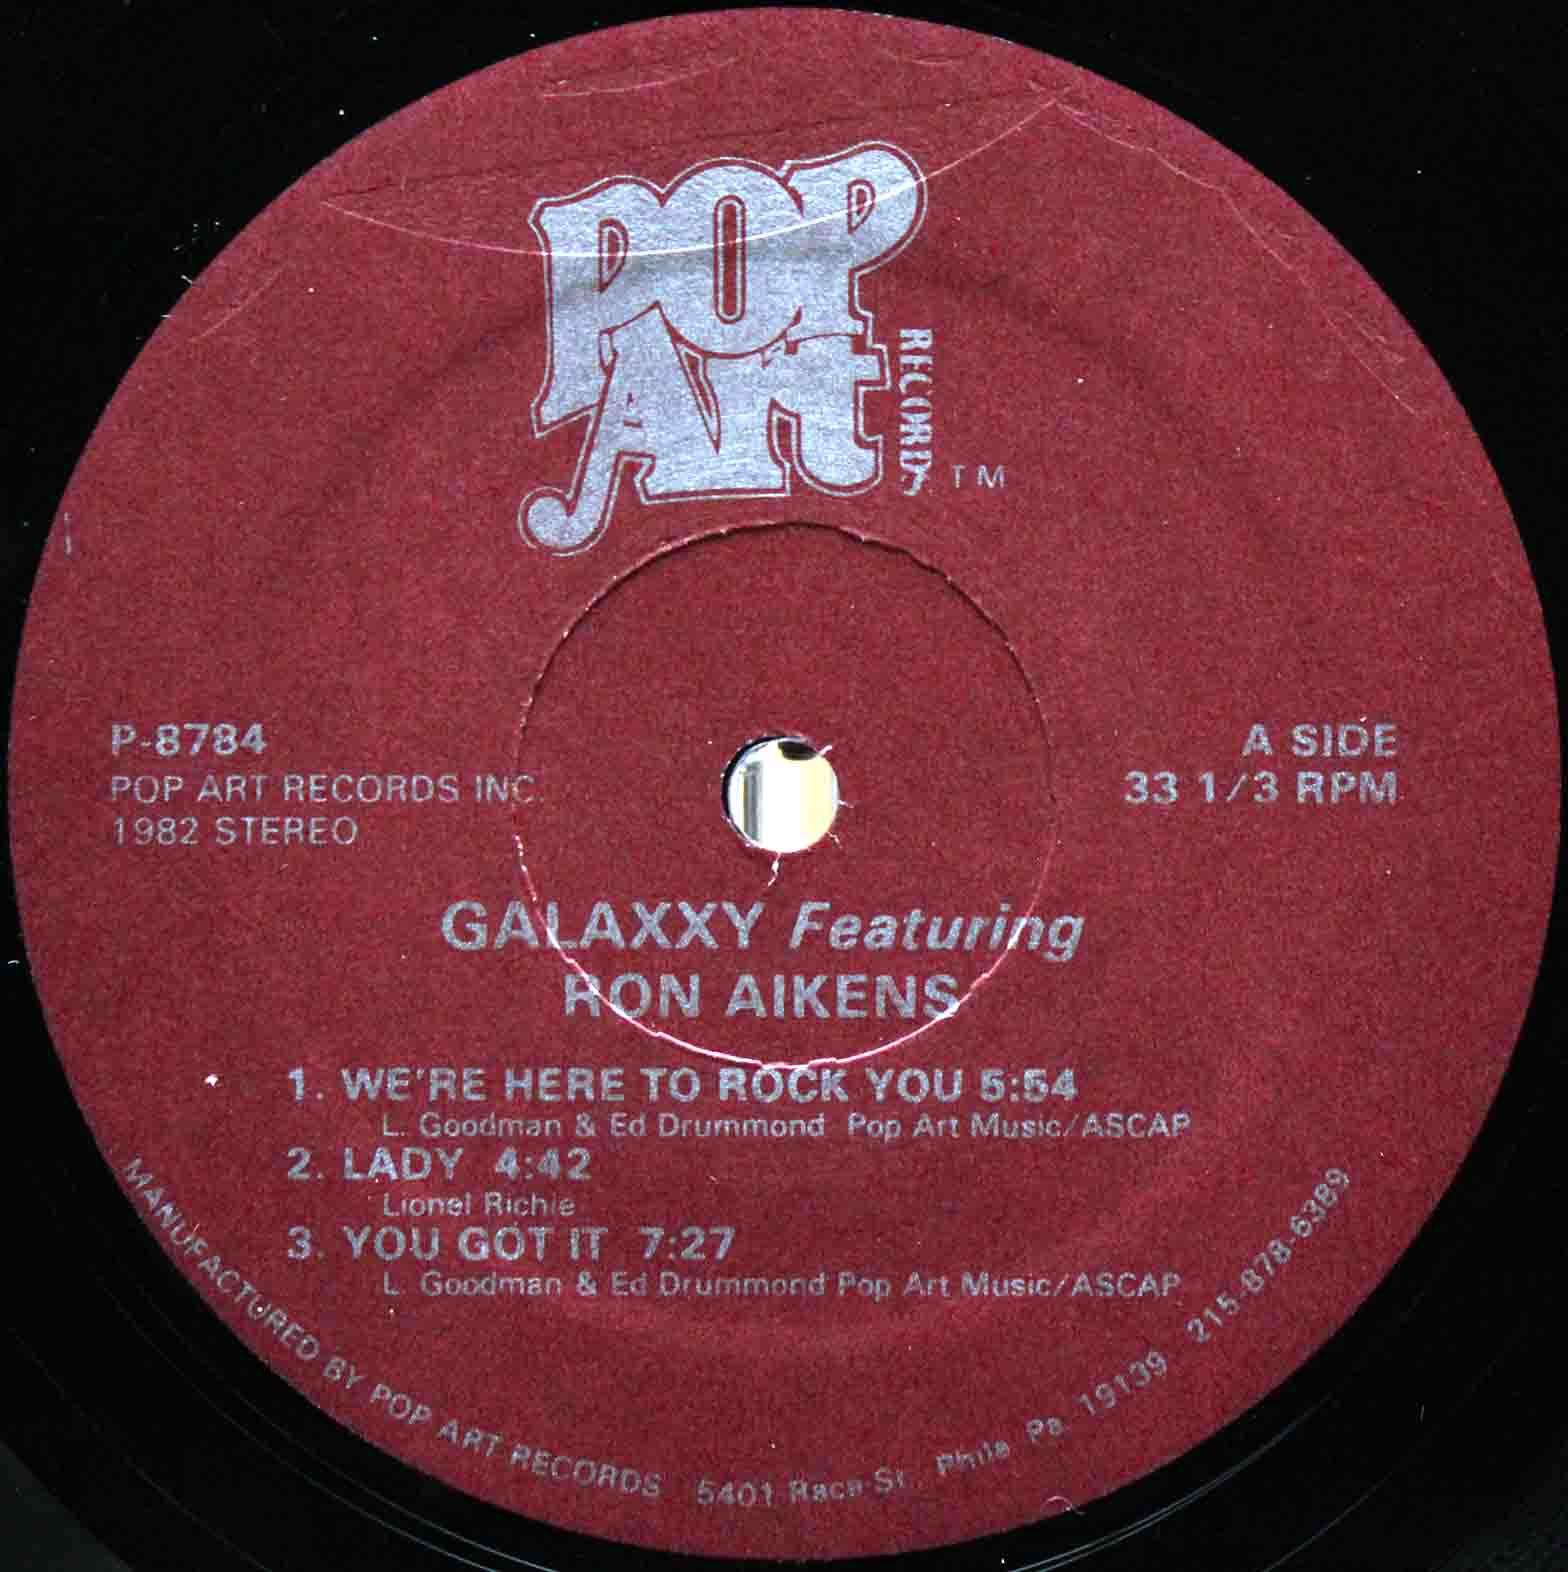 Galaxxy Featuring Ron Aikens (1980) – Galaxxy 03